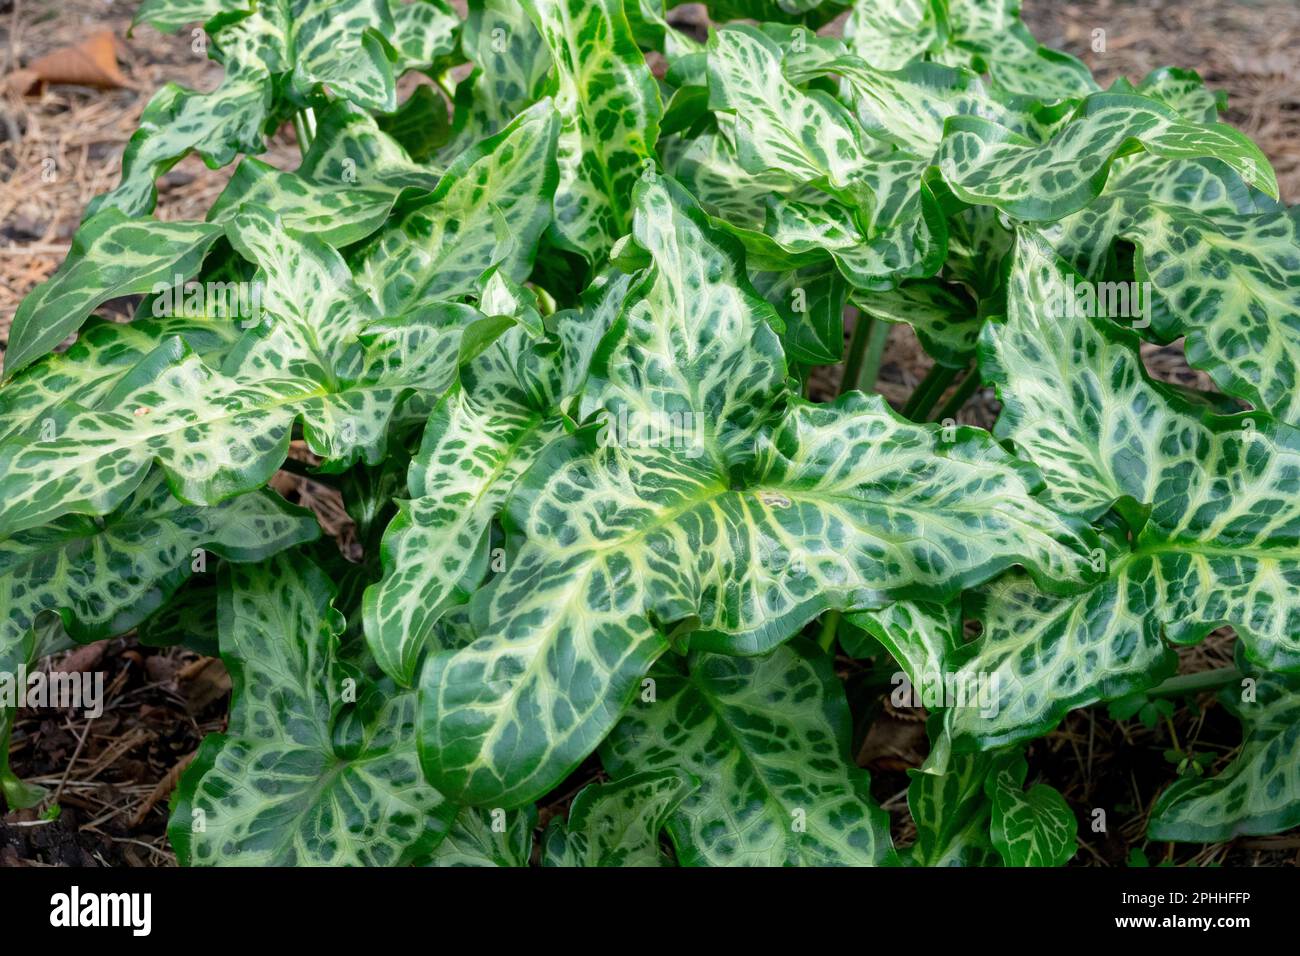 Cluster, Leaves, Arum italicum Marmoratum, Lords and Ladies, Green, Hardy, Plant, Spring, Garden decorative leaf Stock Photo